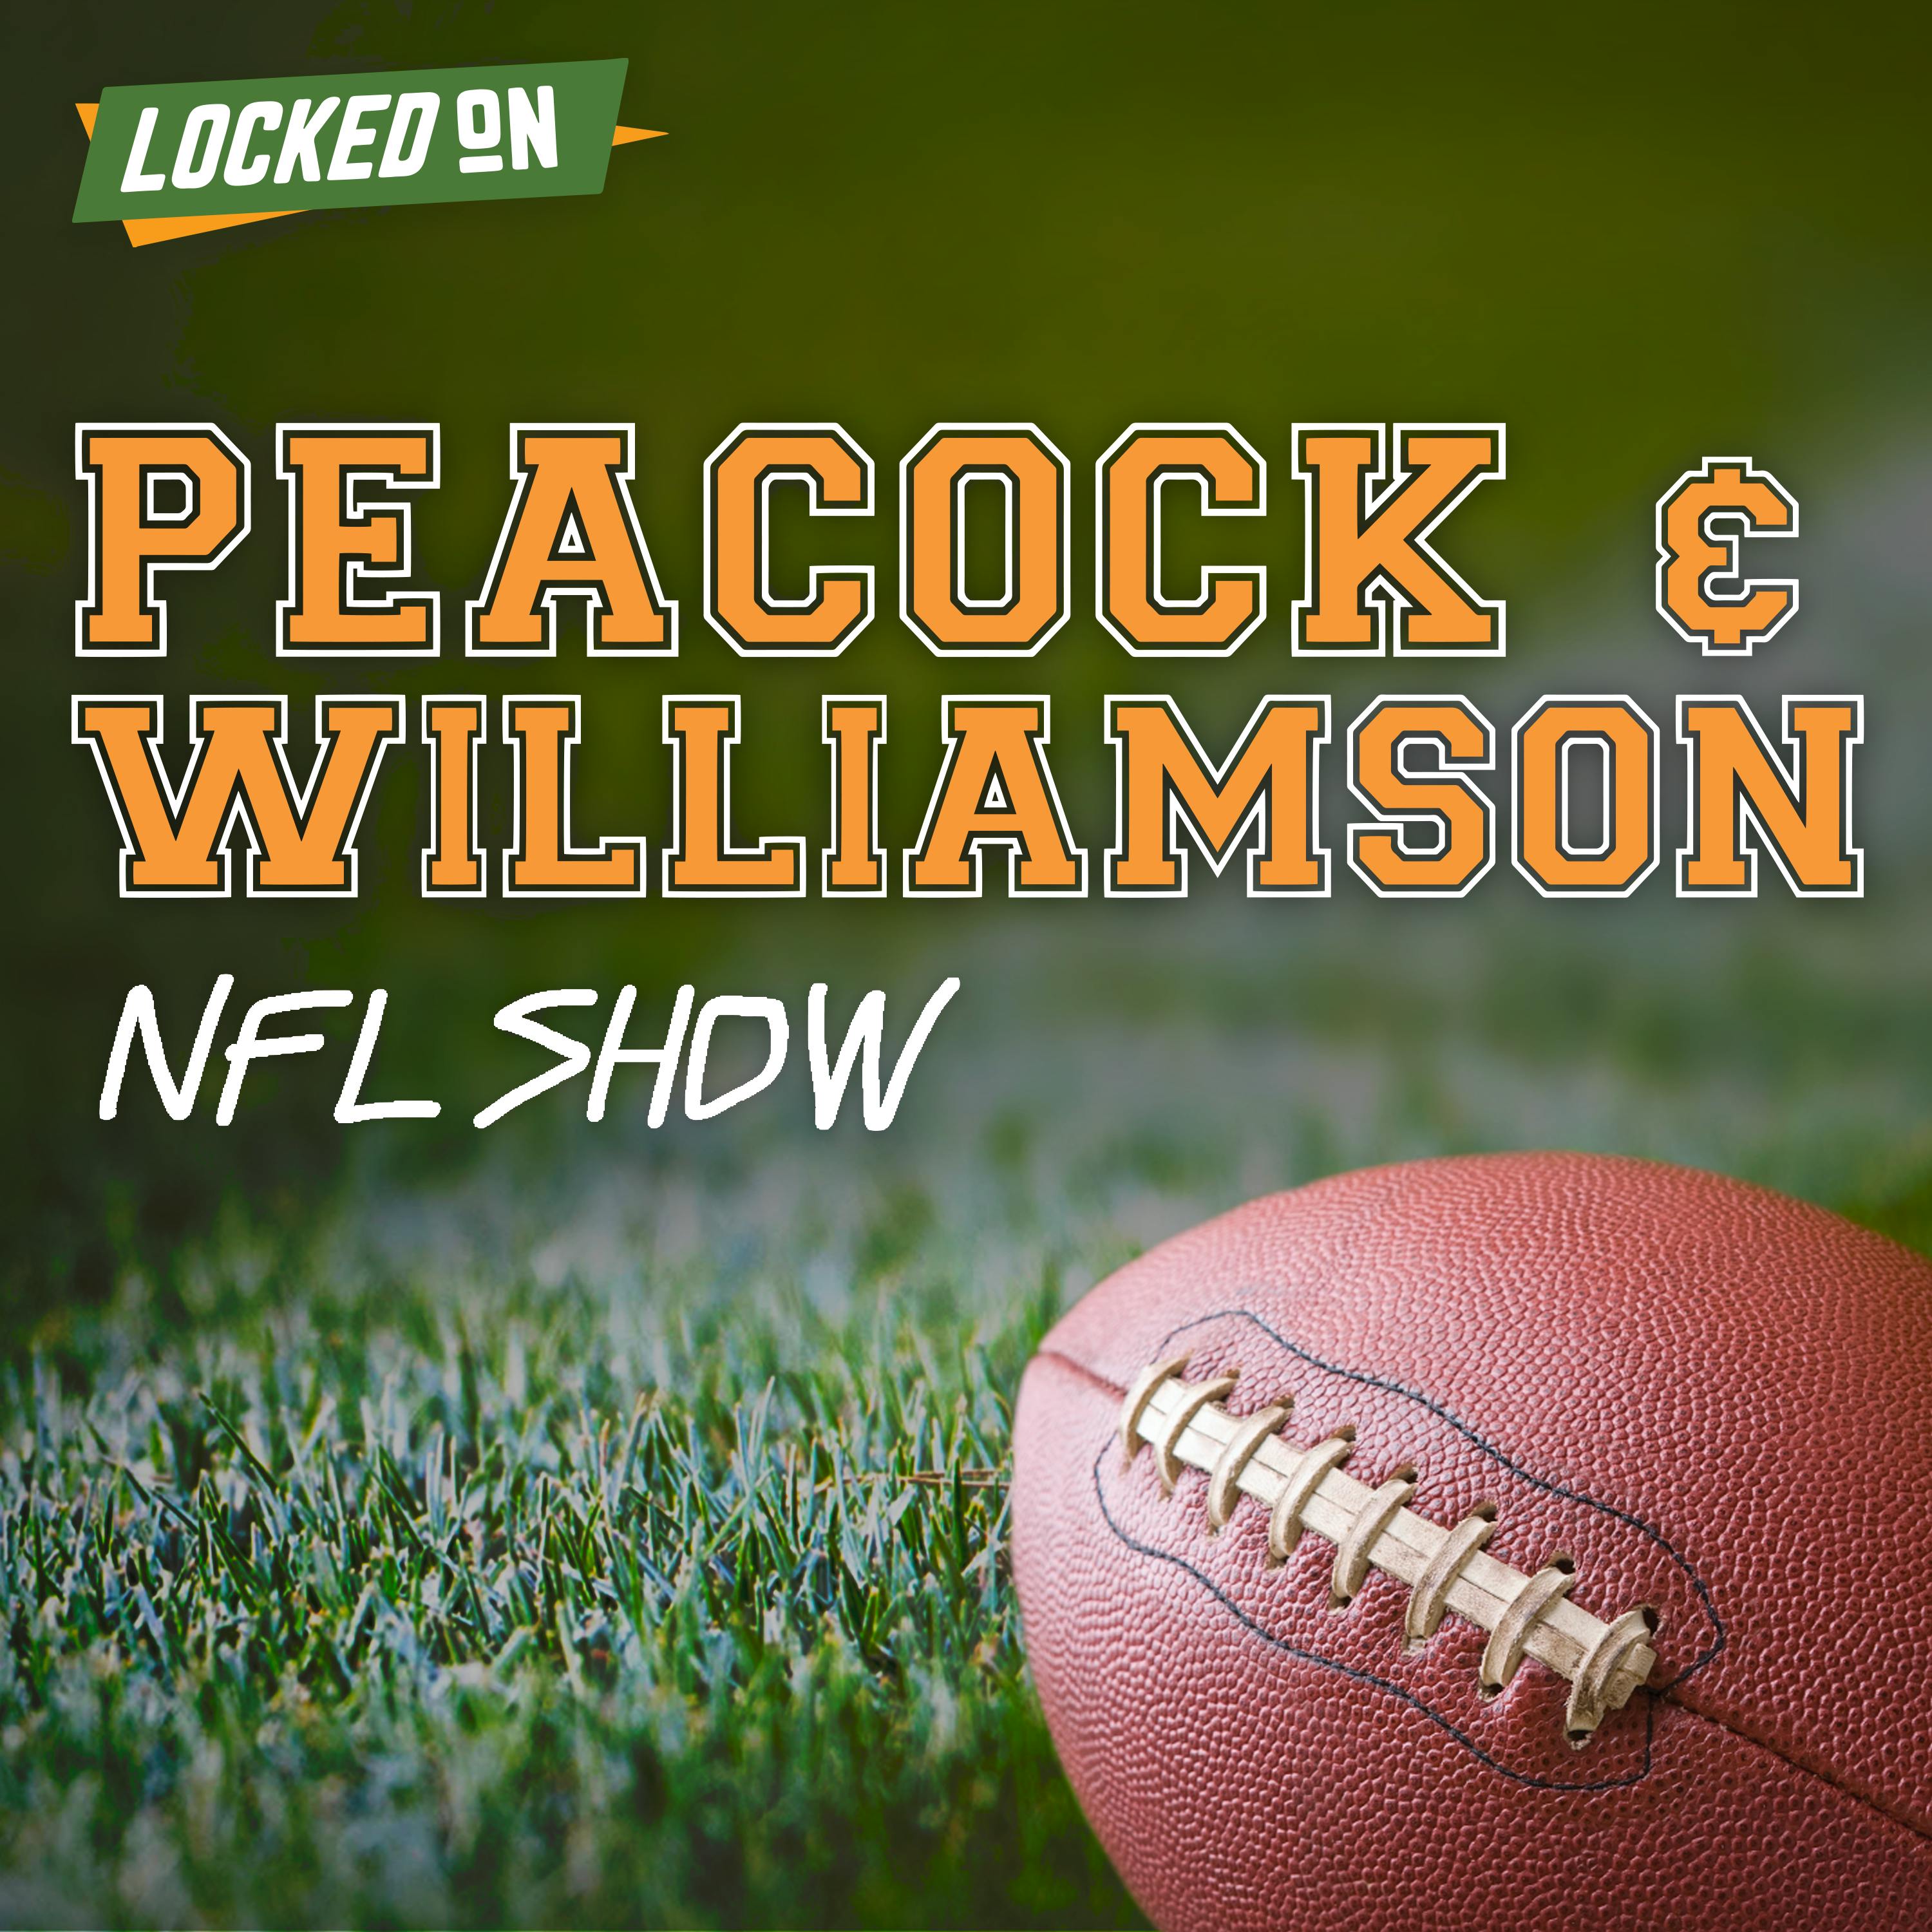 Peacock & Williamson: NFL show on August 26, 2022